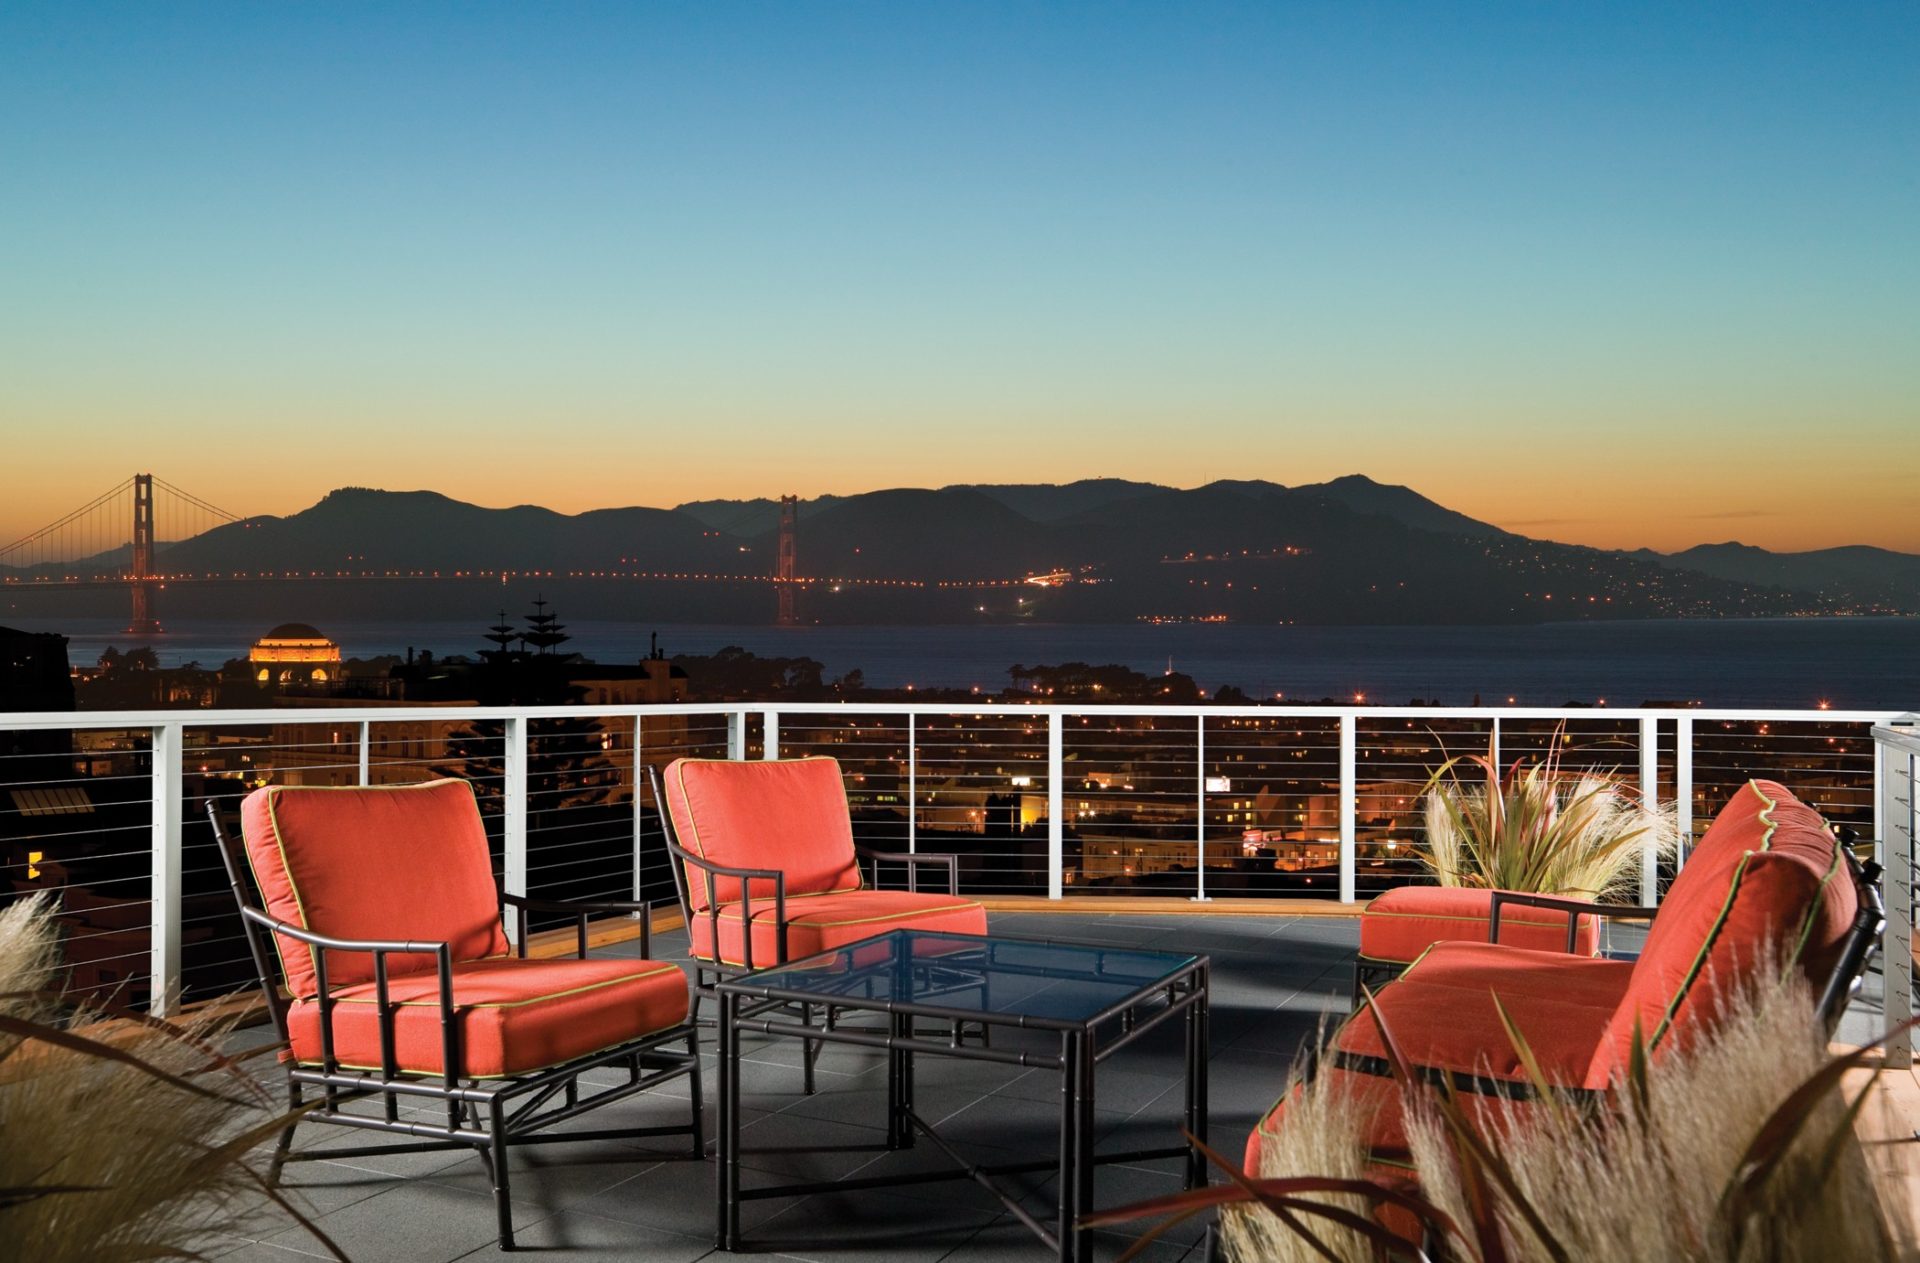 Rooftop deck in Pacific Heights neighborhood of San Francisco with custom cable railings and a view of the Golden Gate bridge at night